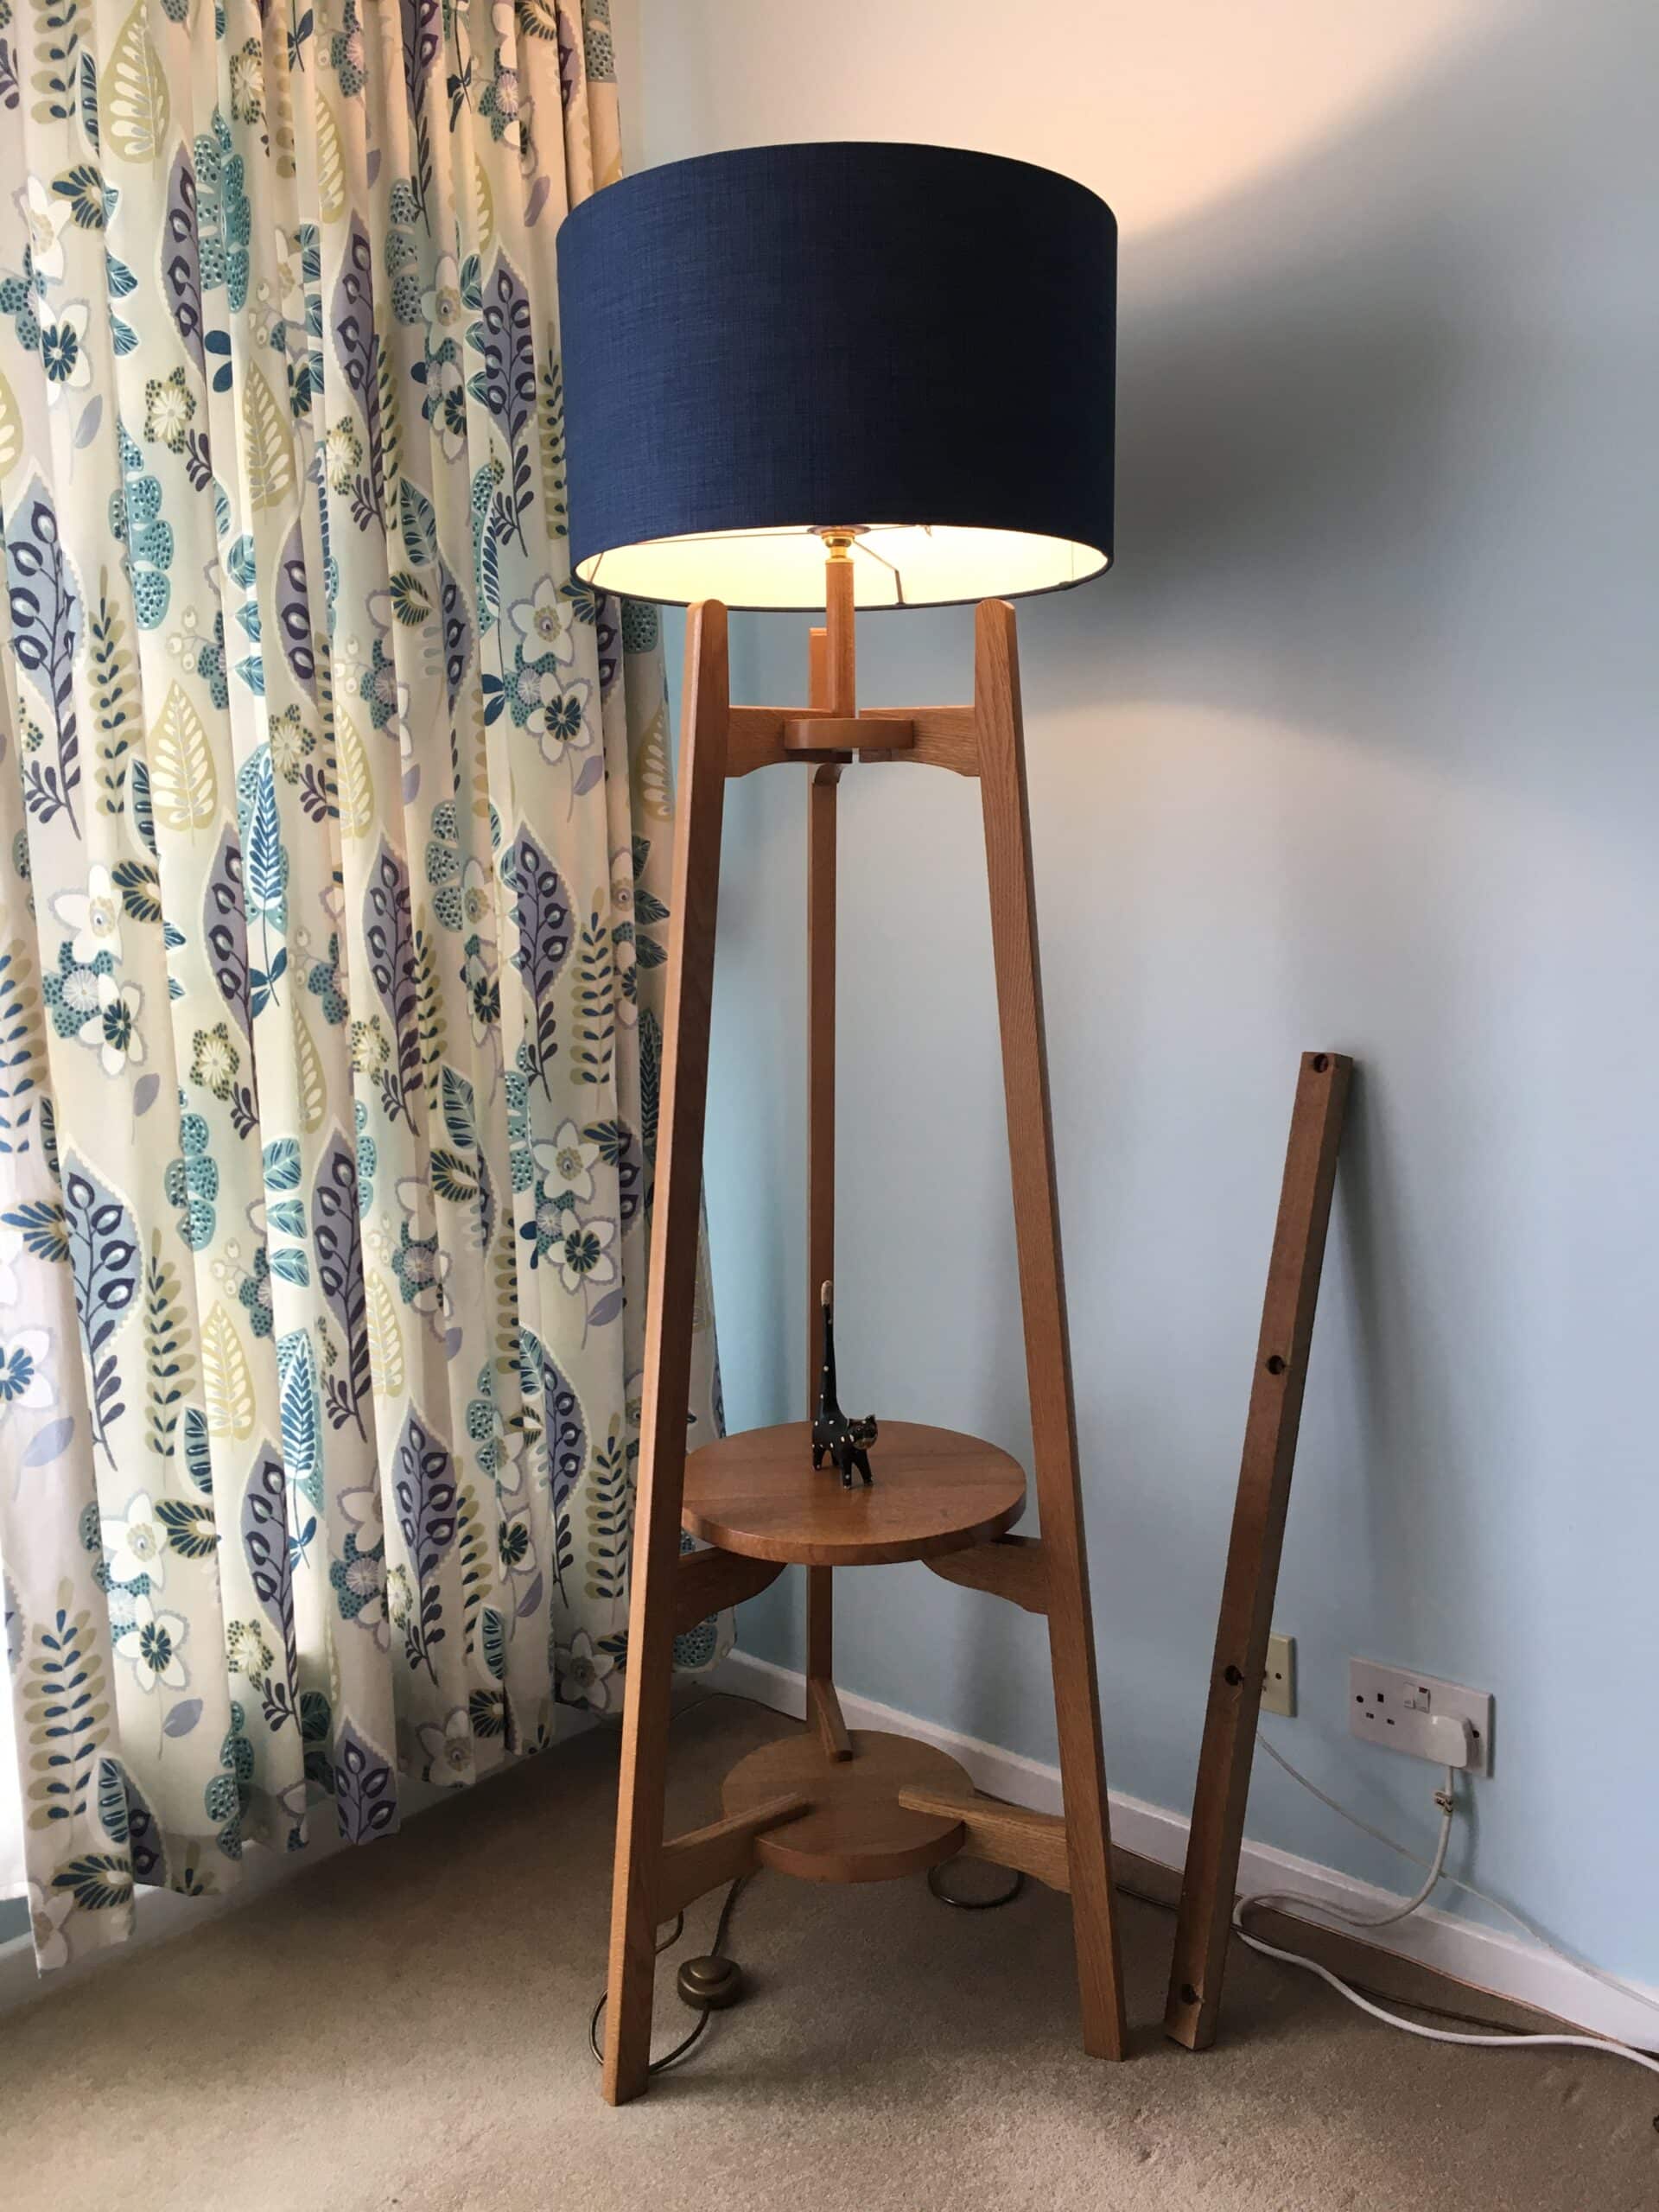 Floor Lamp by Mike Towndrow